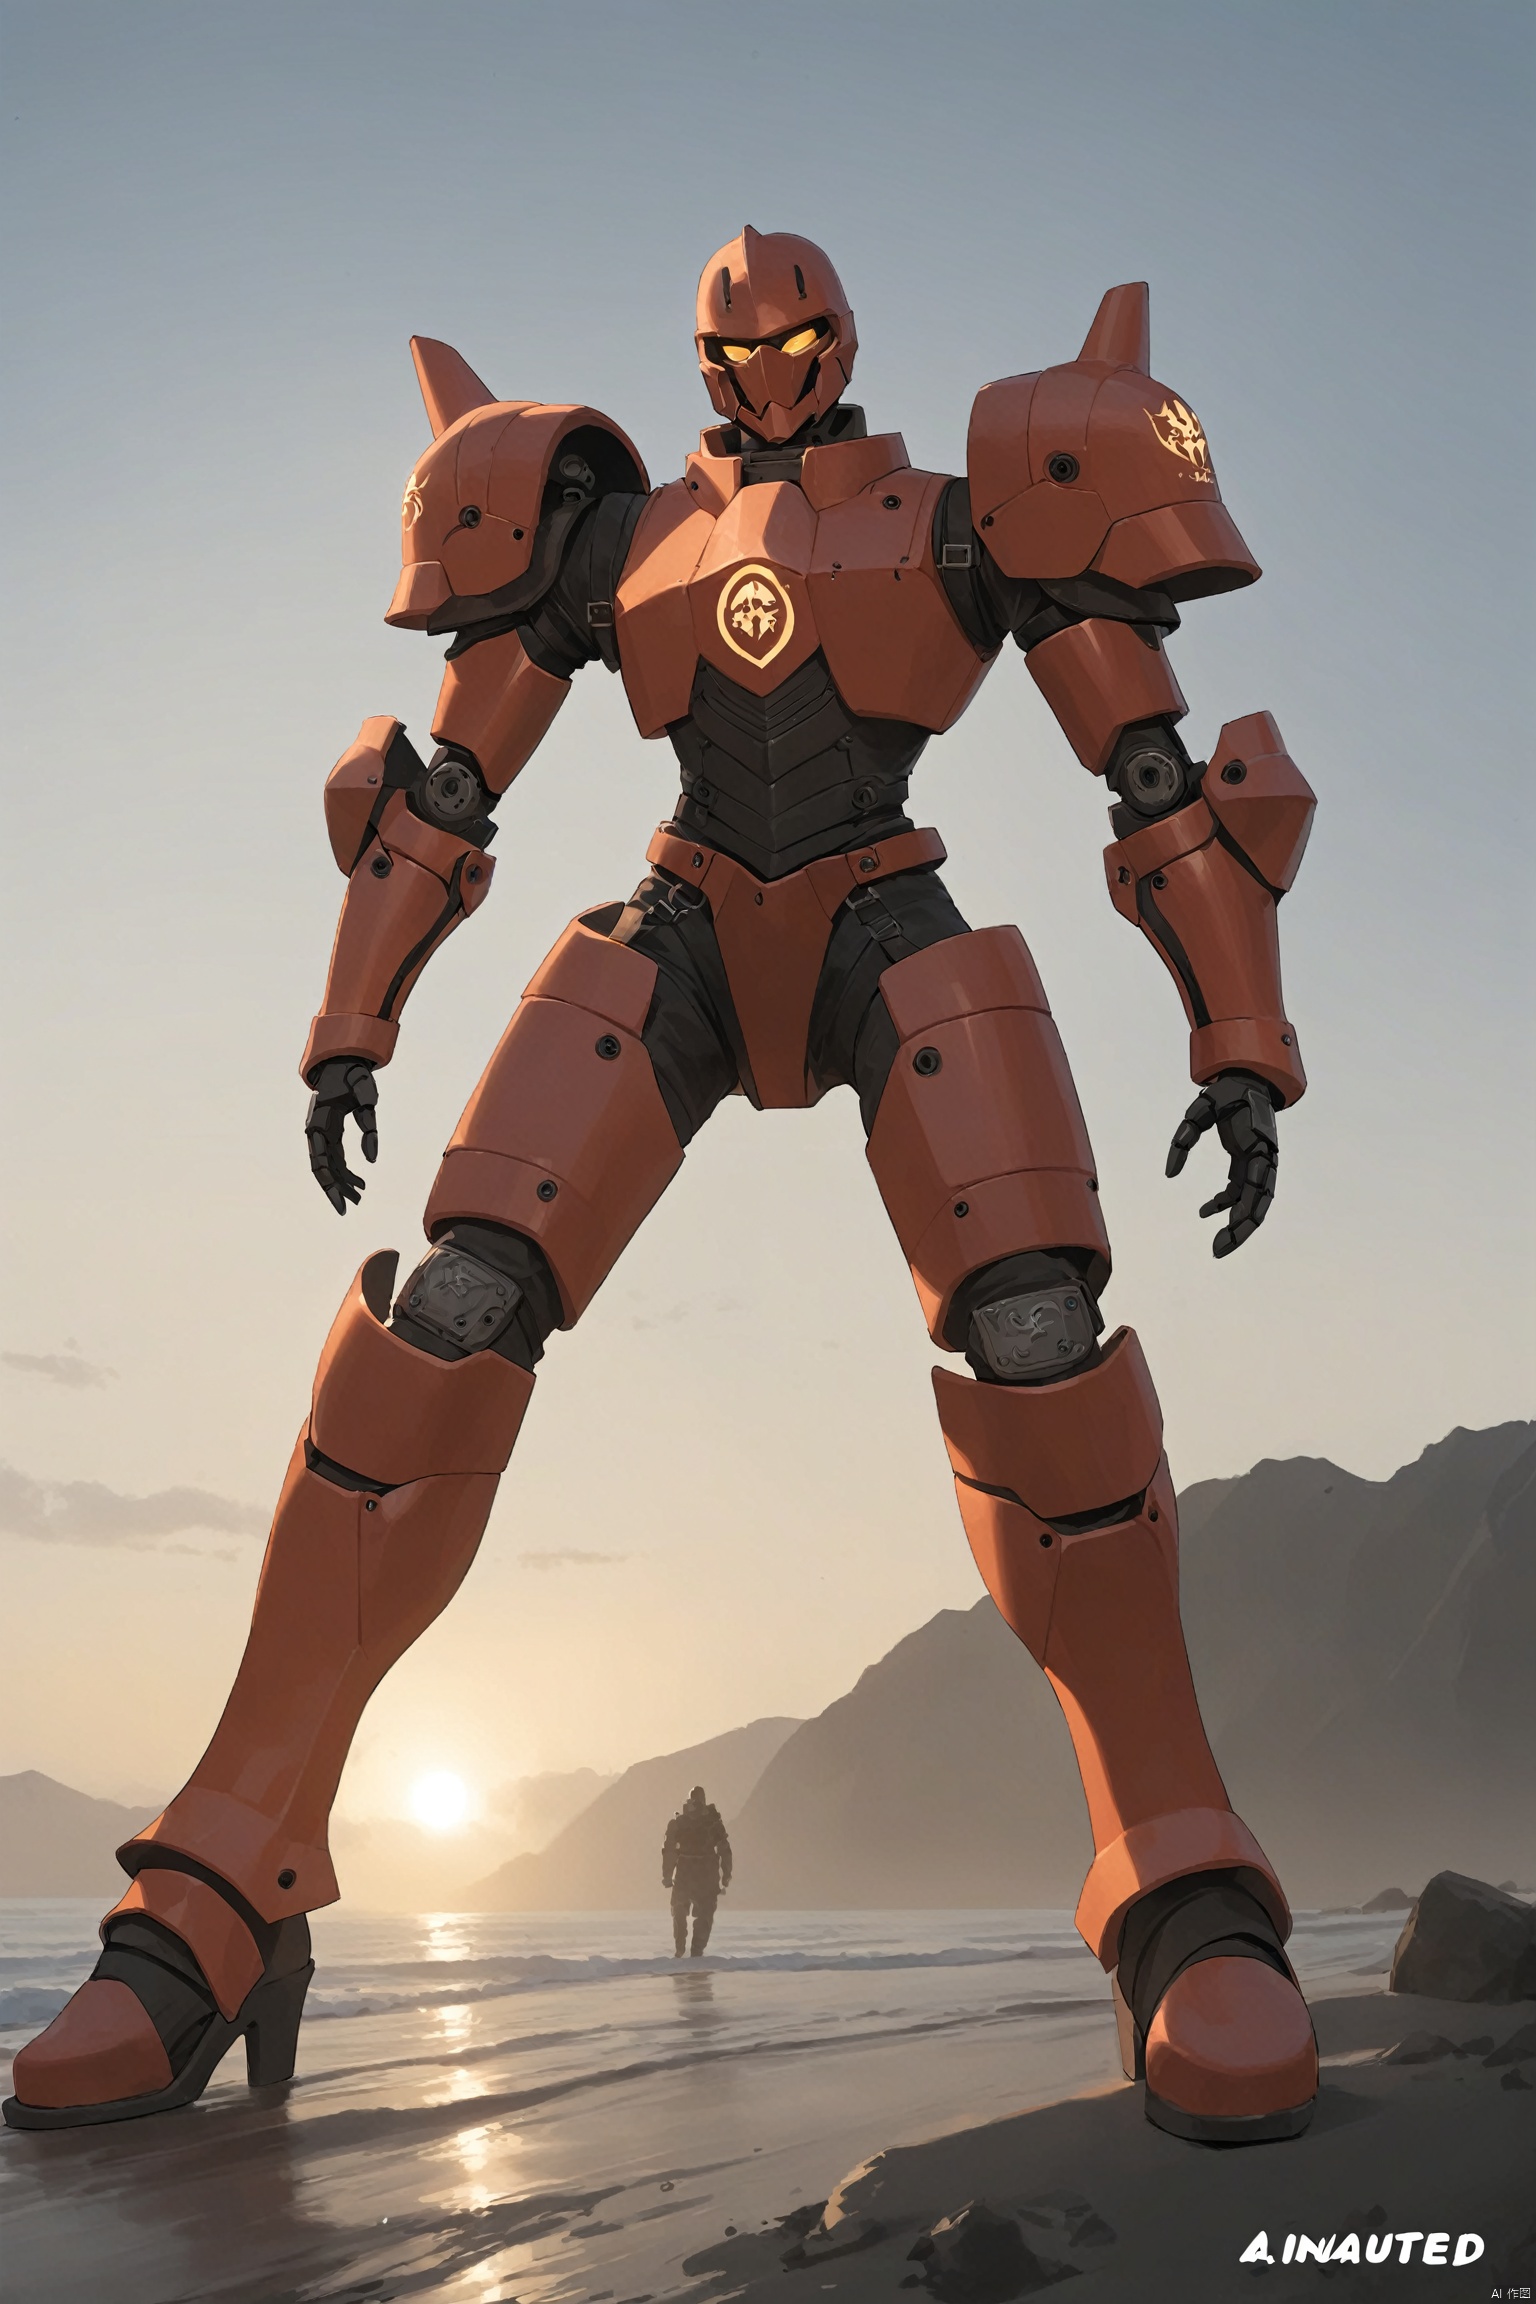  absurdres,incredibly absurdres,reality,realistic,full_shot, Armor_Partial mech,